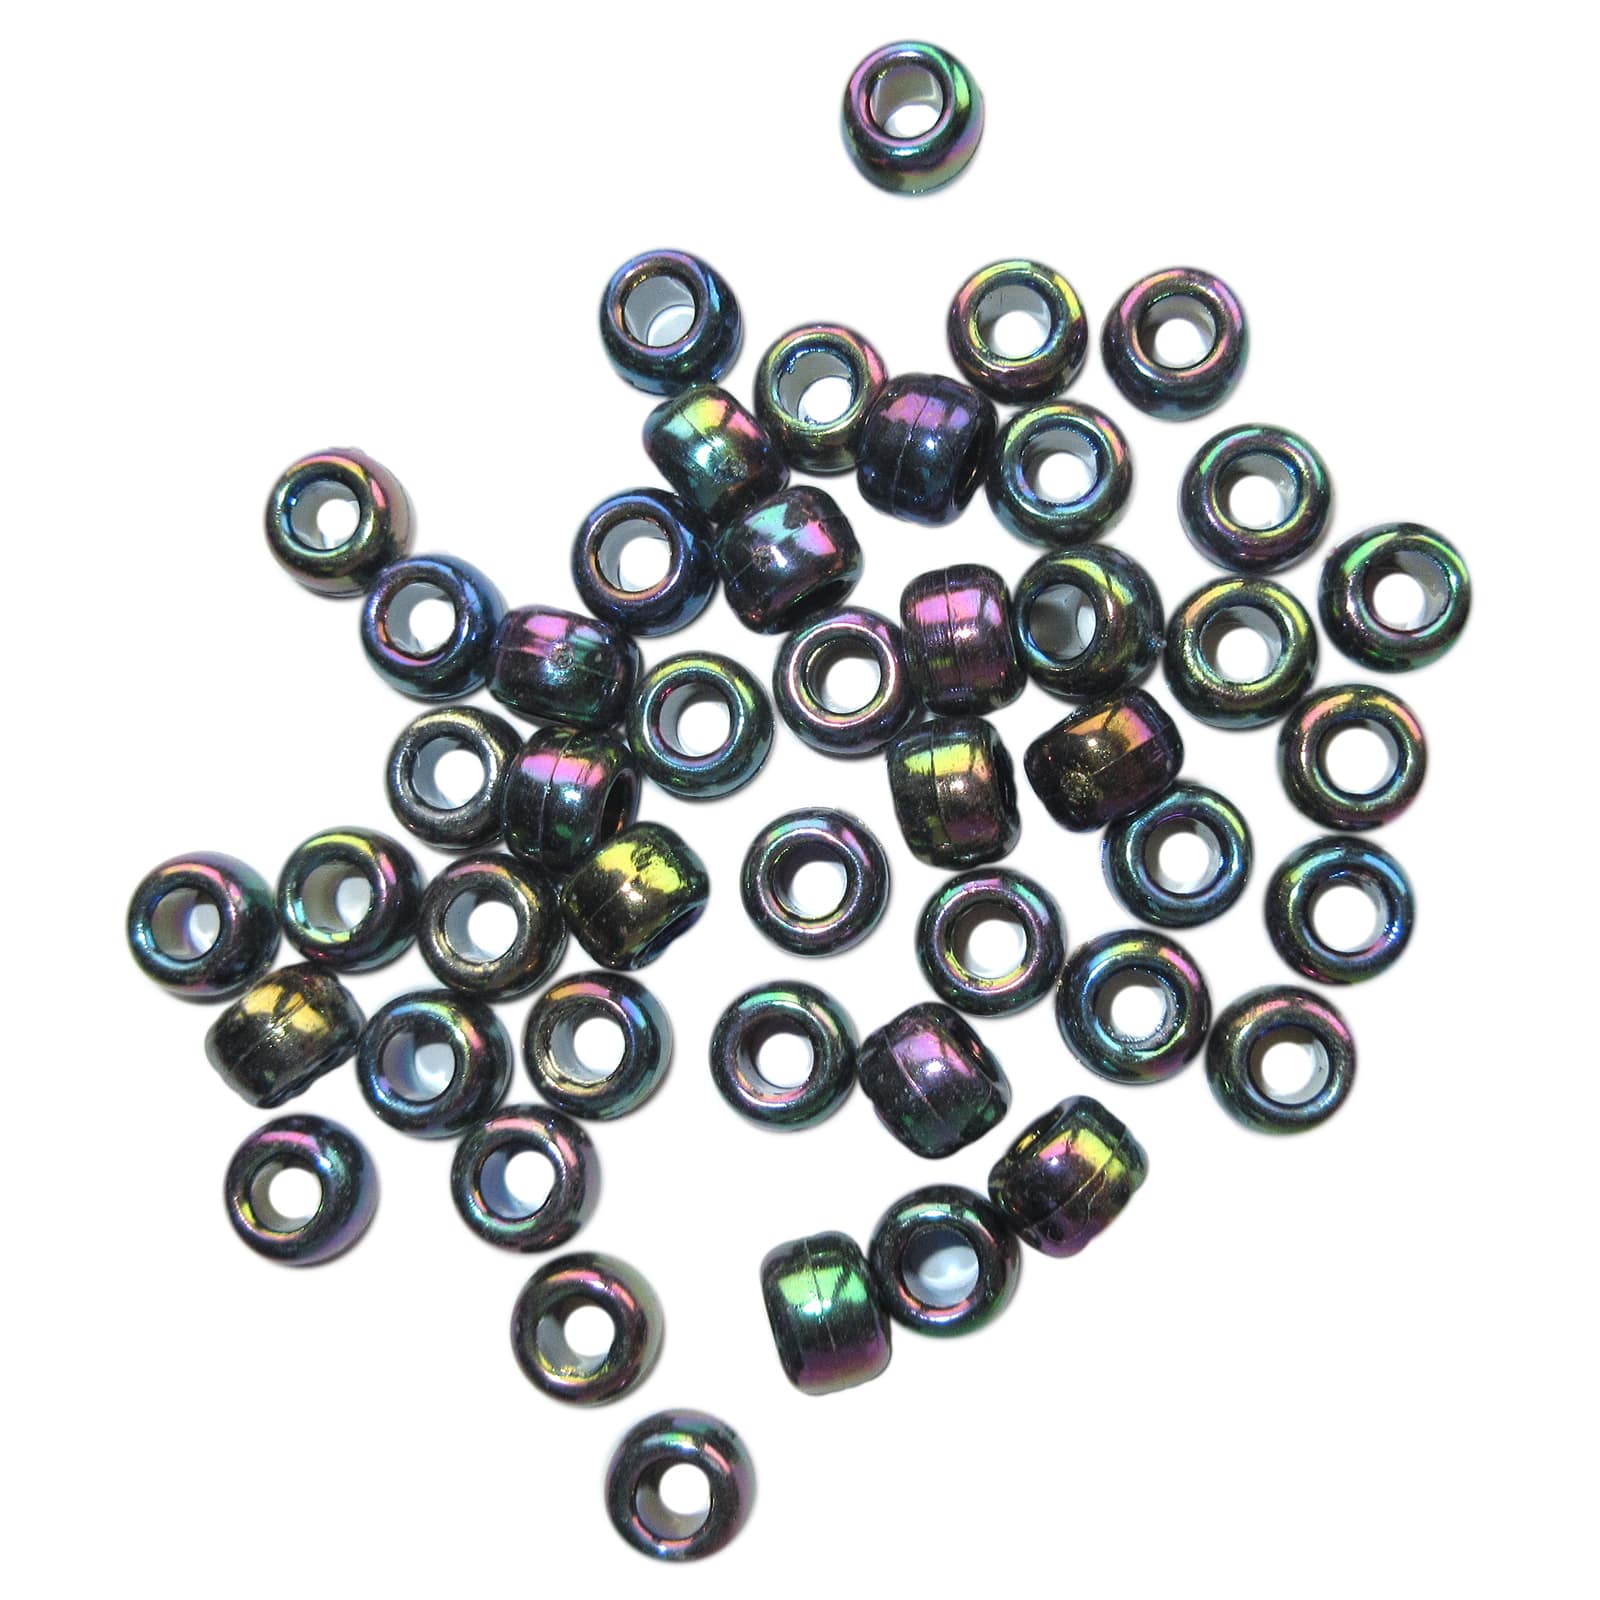 Multicolor Pony Beads by Creatology™, 6mm x 9mm, Michaels